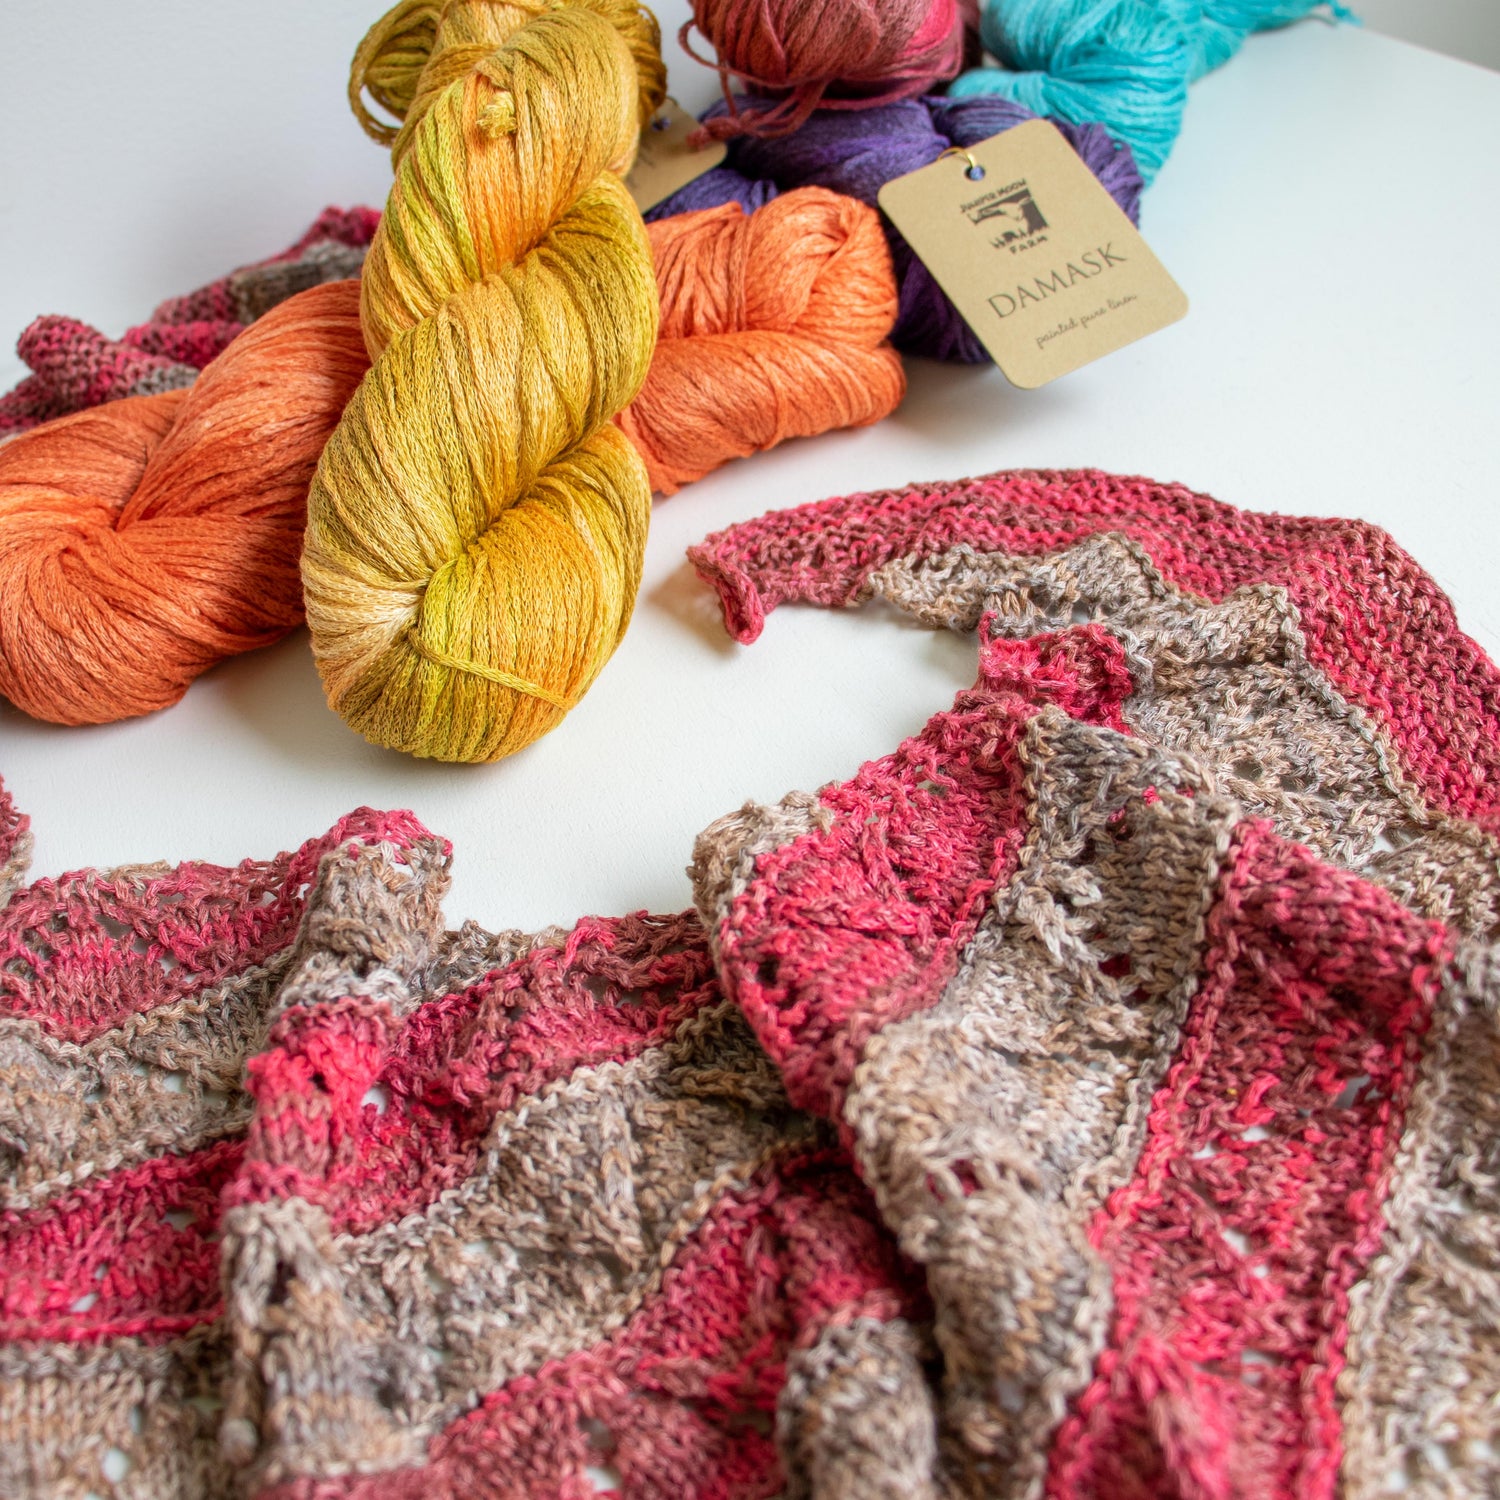 Browse our range of the exquisite Juniper Moon yarn "Damask".